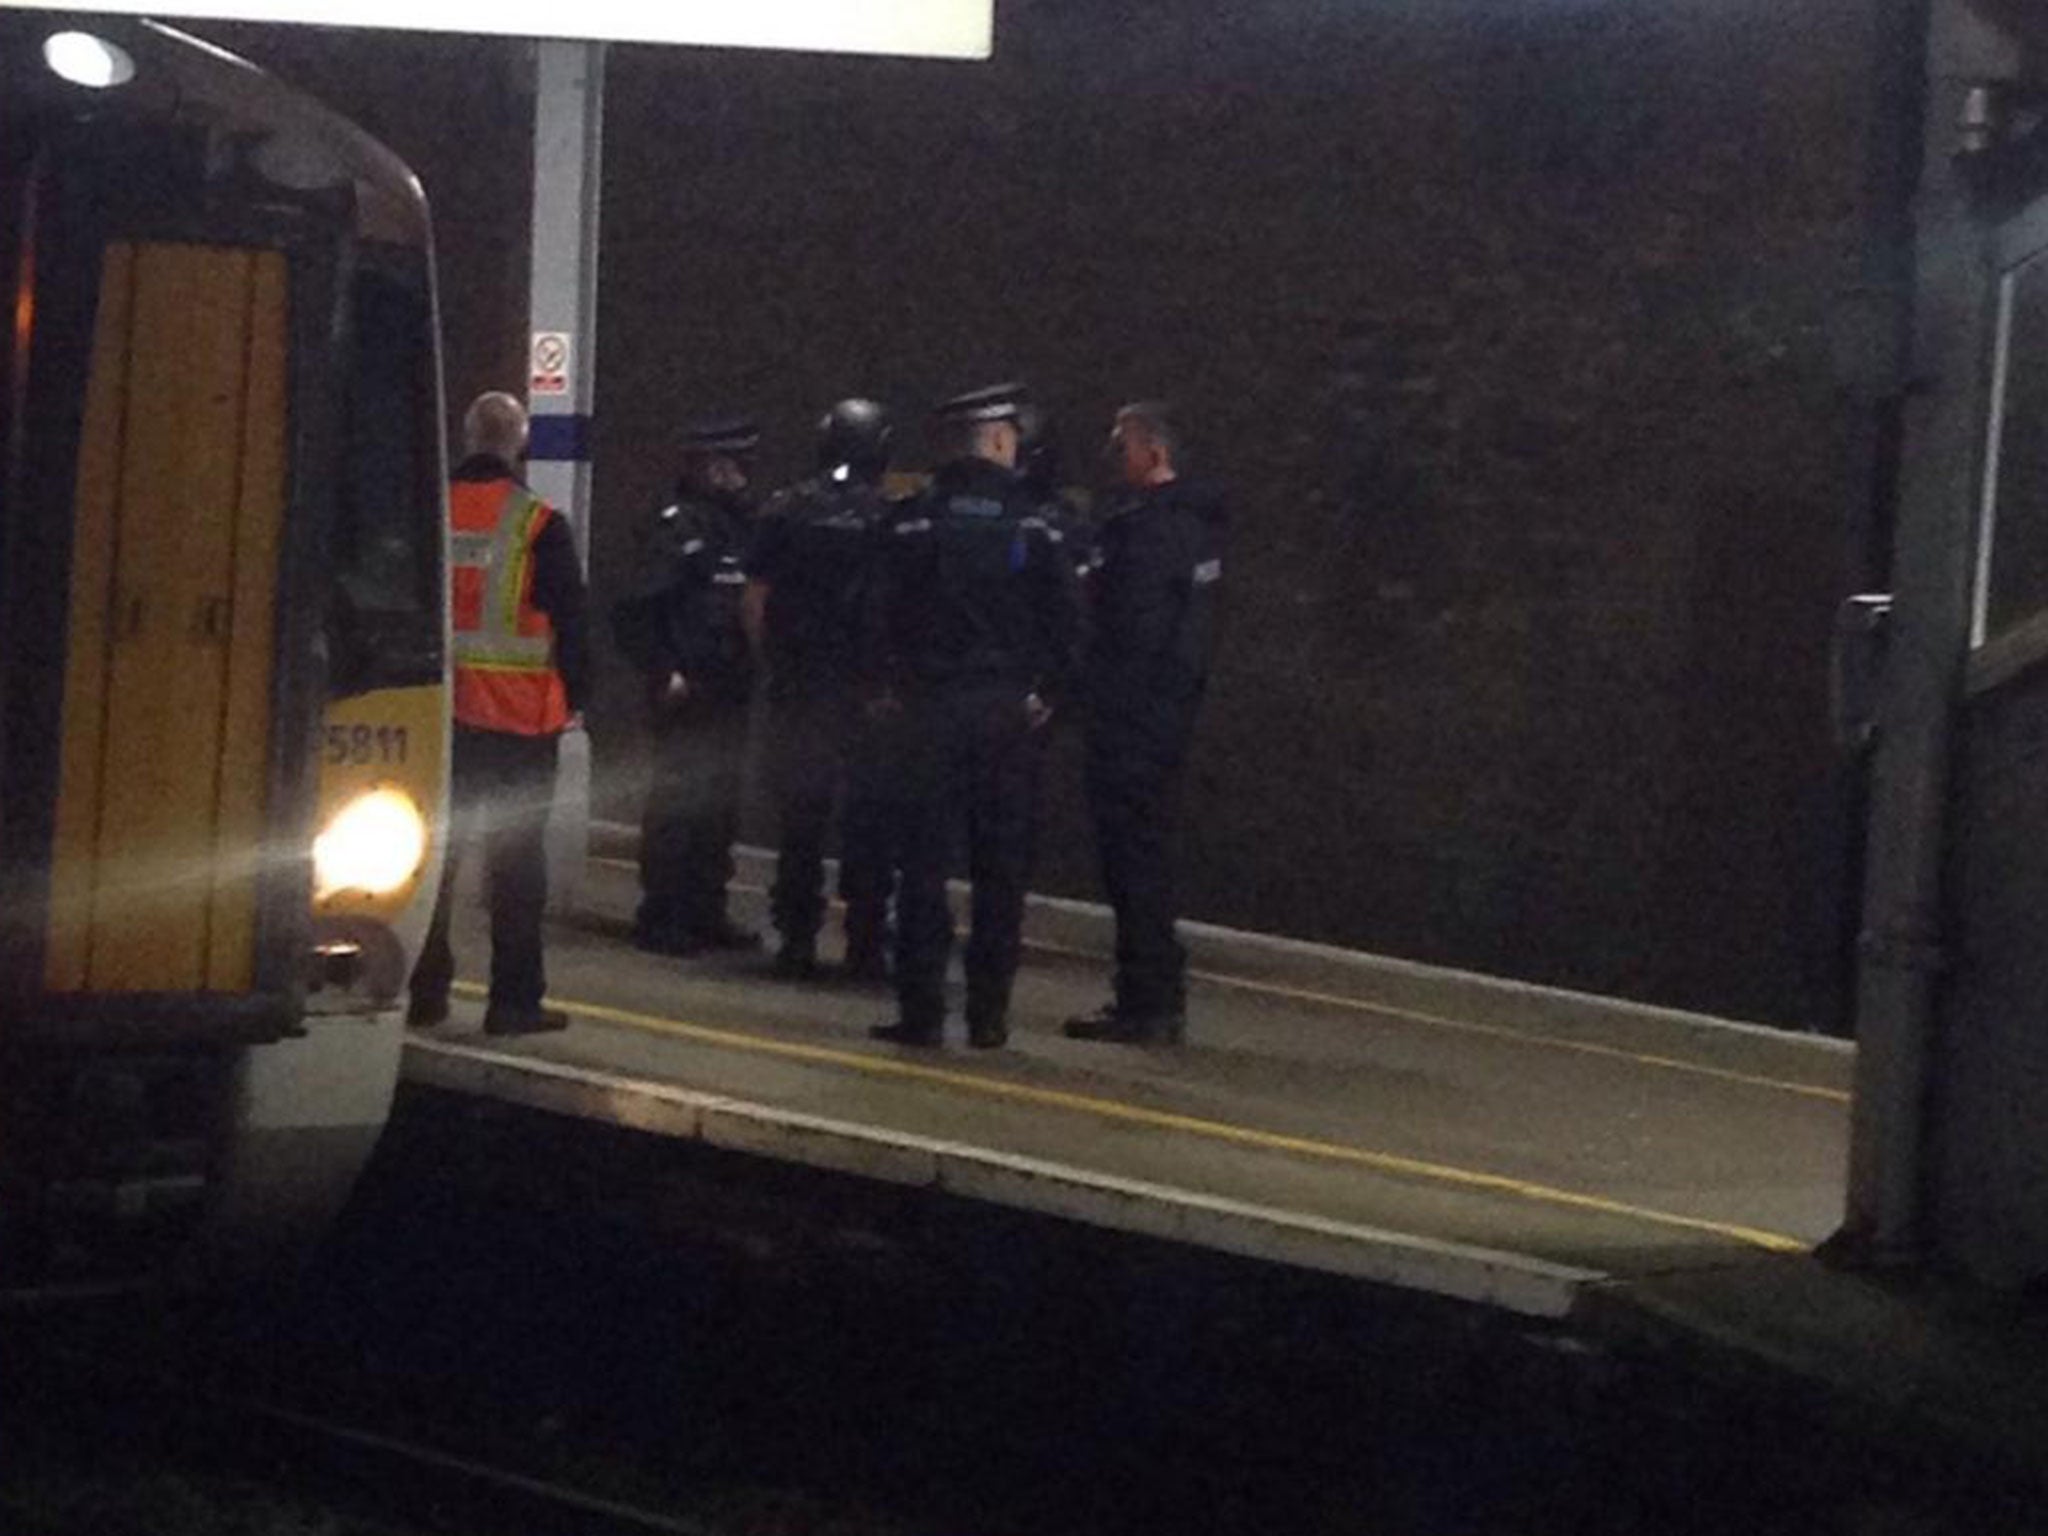 Police at Gillingham railway station on 5 February 2016